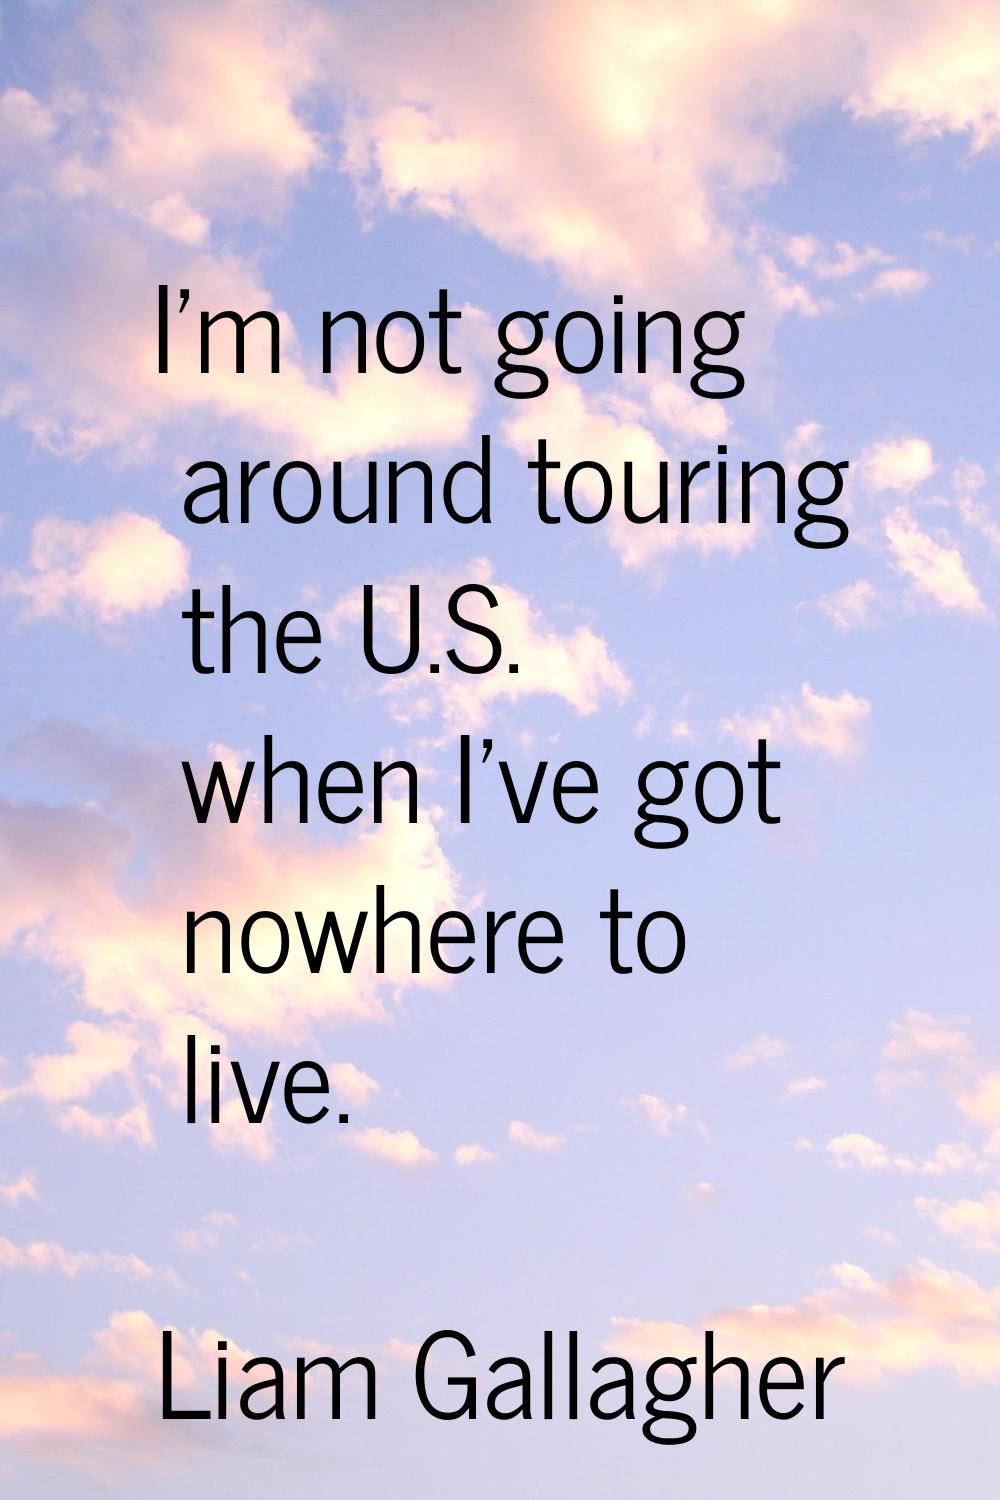 I'm not going around touring the U.S. when I've got nowhere to live.